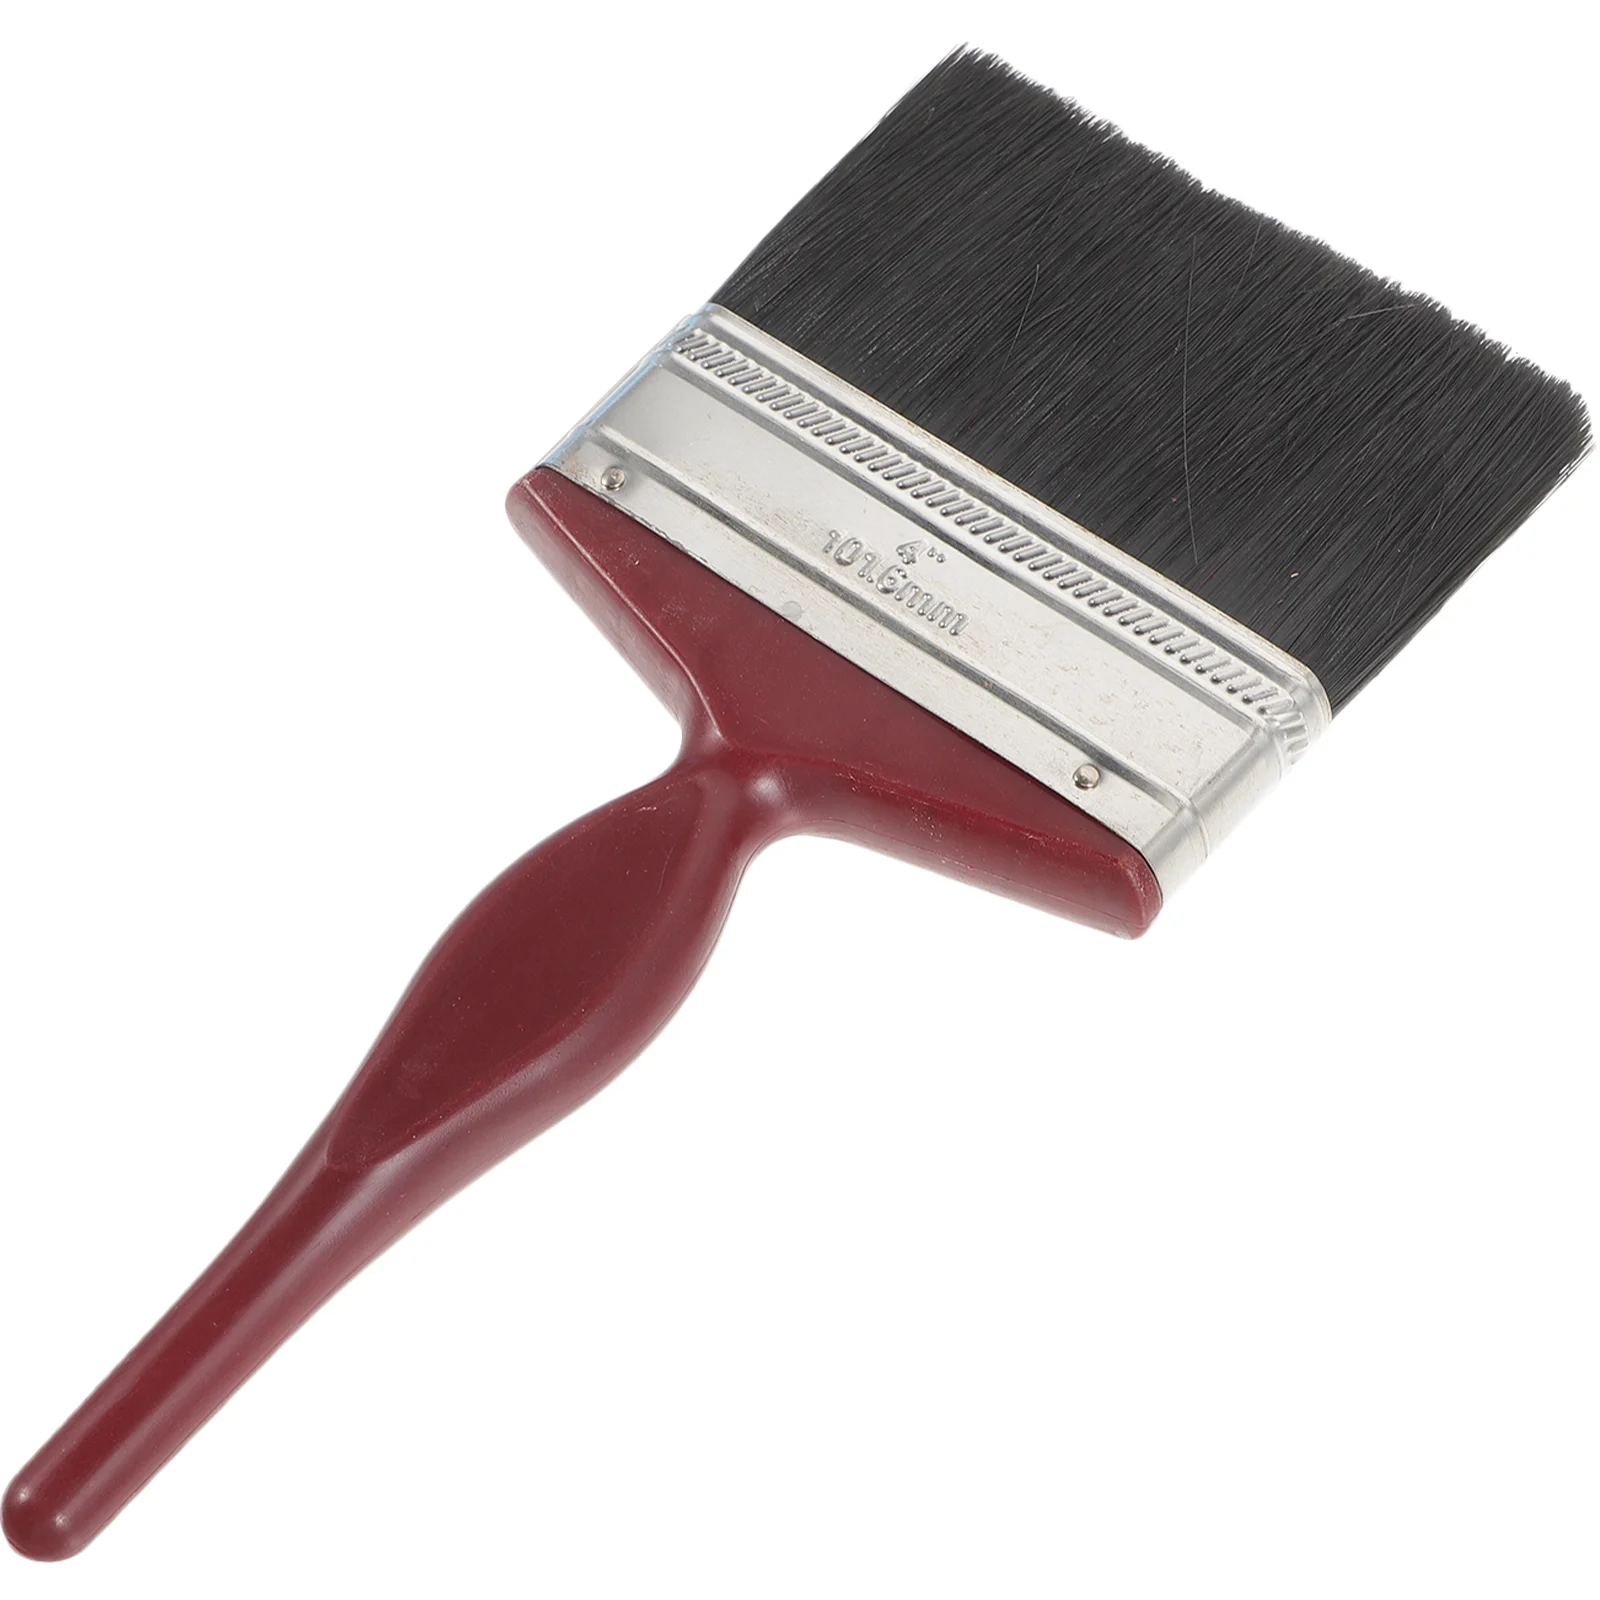 

Paint Brush for Walls Deck Stain Wood Fence to Apply Applicator Painting Wooden Brushes